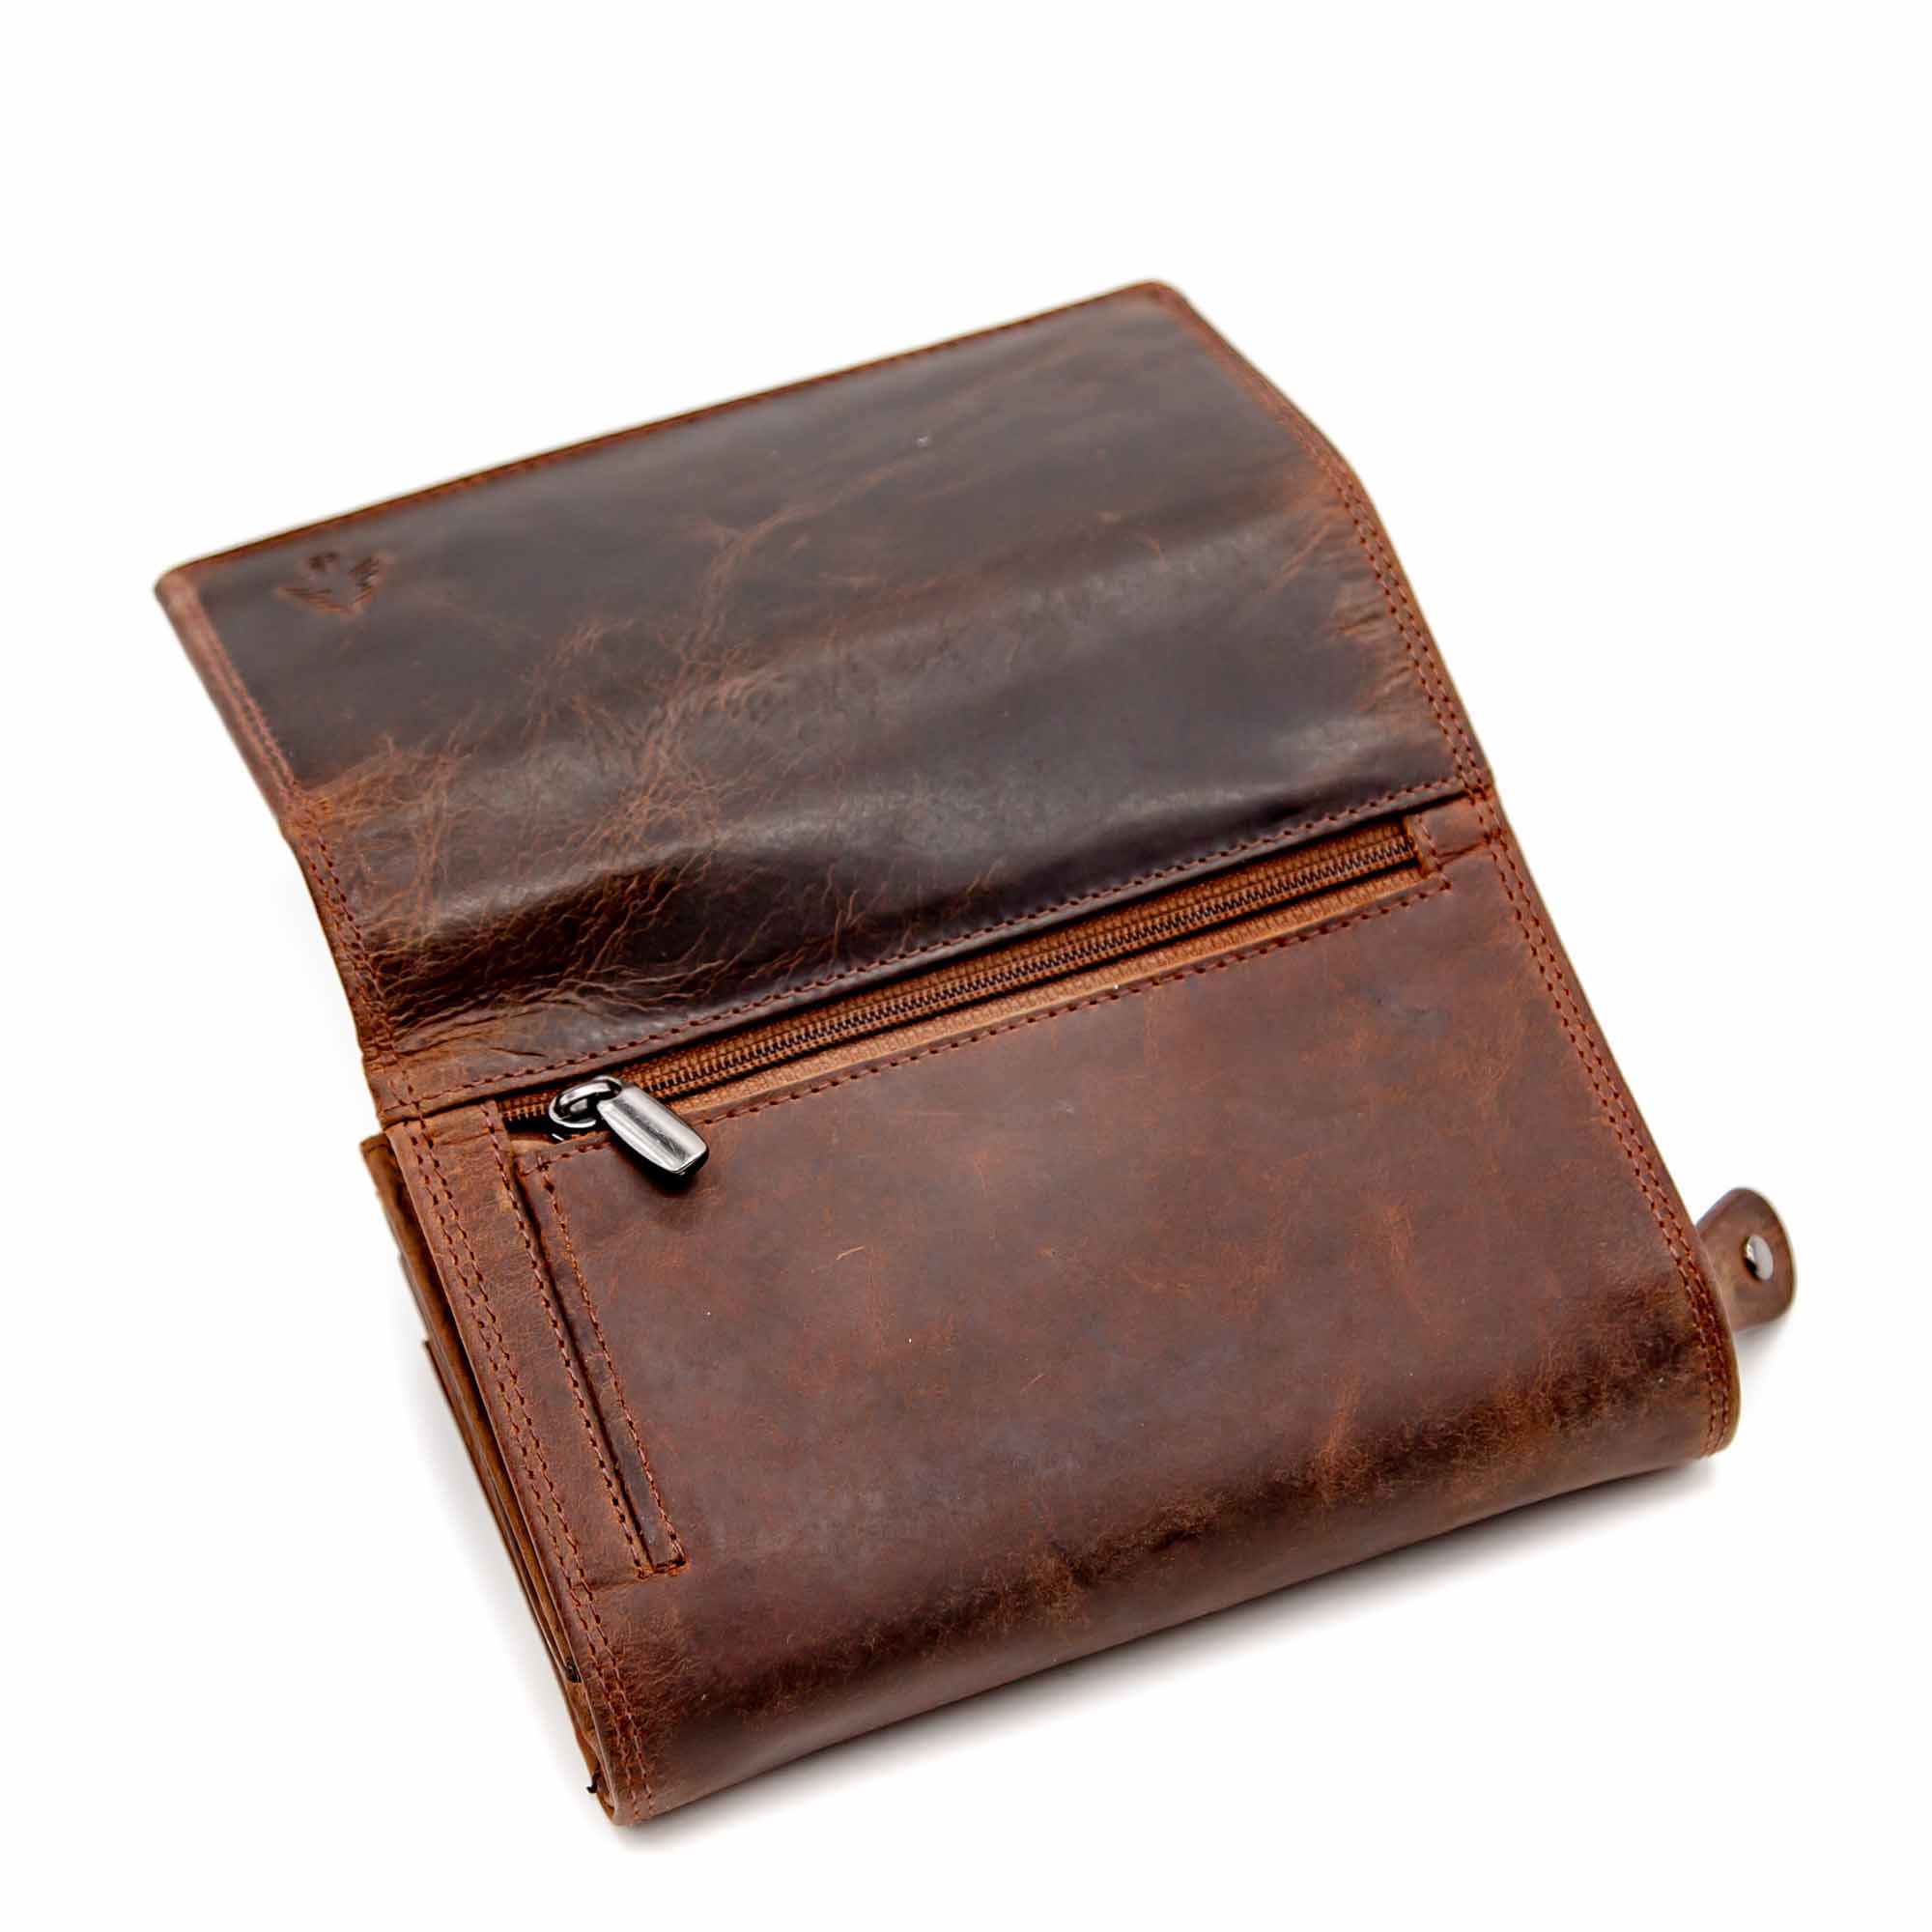 Ann Leather RFID Wallet - Mortise And Tenon